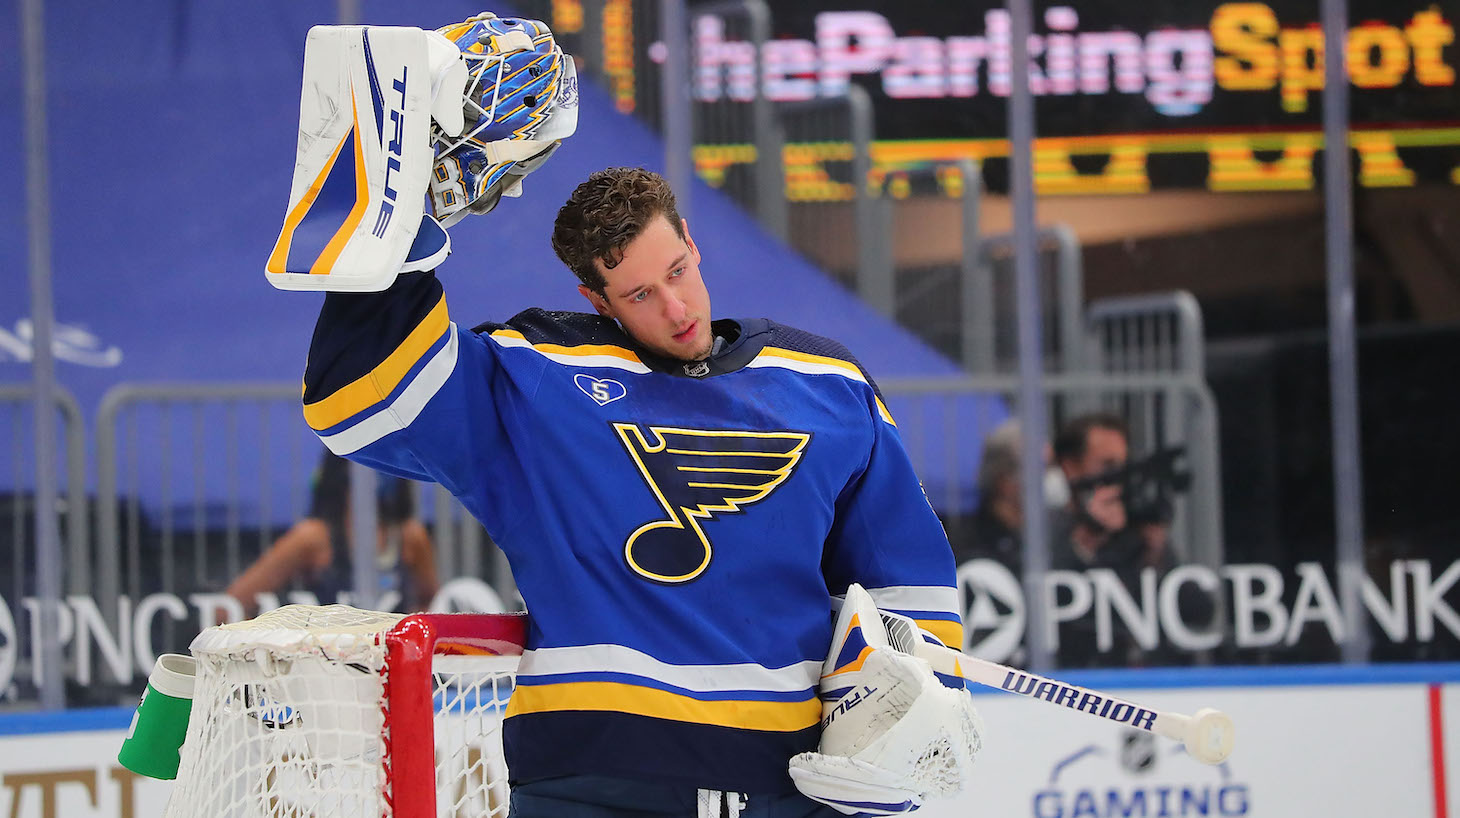 ST LOUIS, MO - APRIL 22: Jordan Binnington #50 of the St. Louis Blues gets ready to play the Colorado Avalanche at Enterprise Center on April 22, 2021 in St Louis, Missouri. (Photo by Dilip Vishwanat/Getty Images)